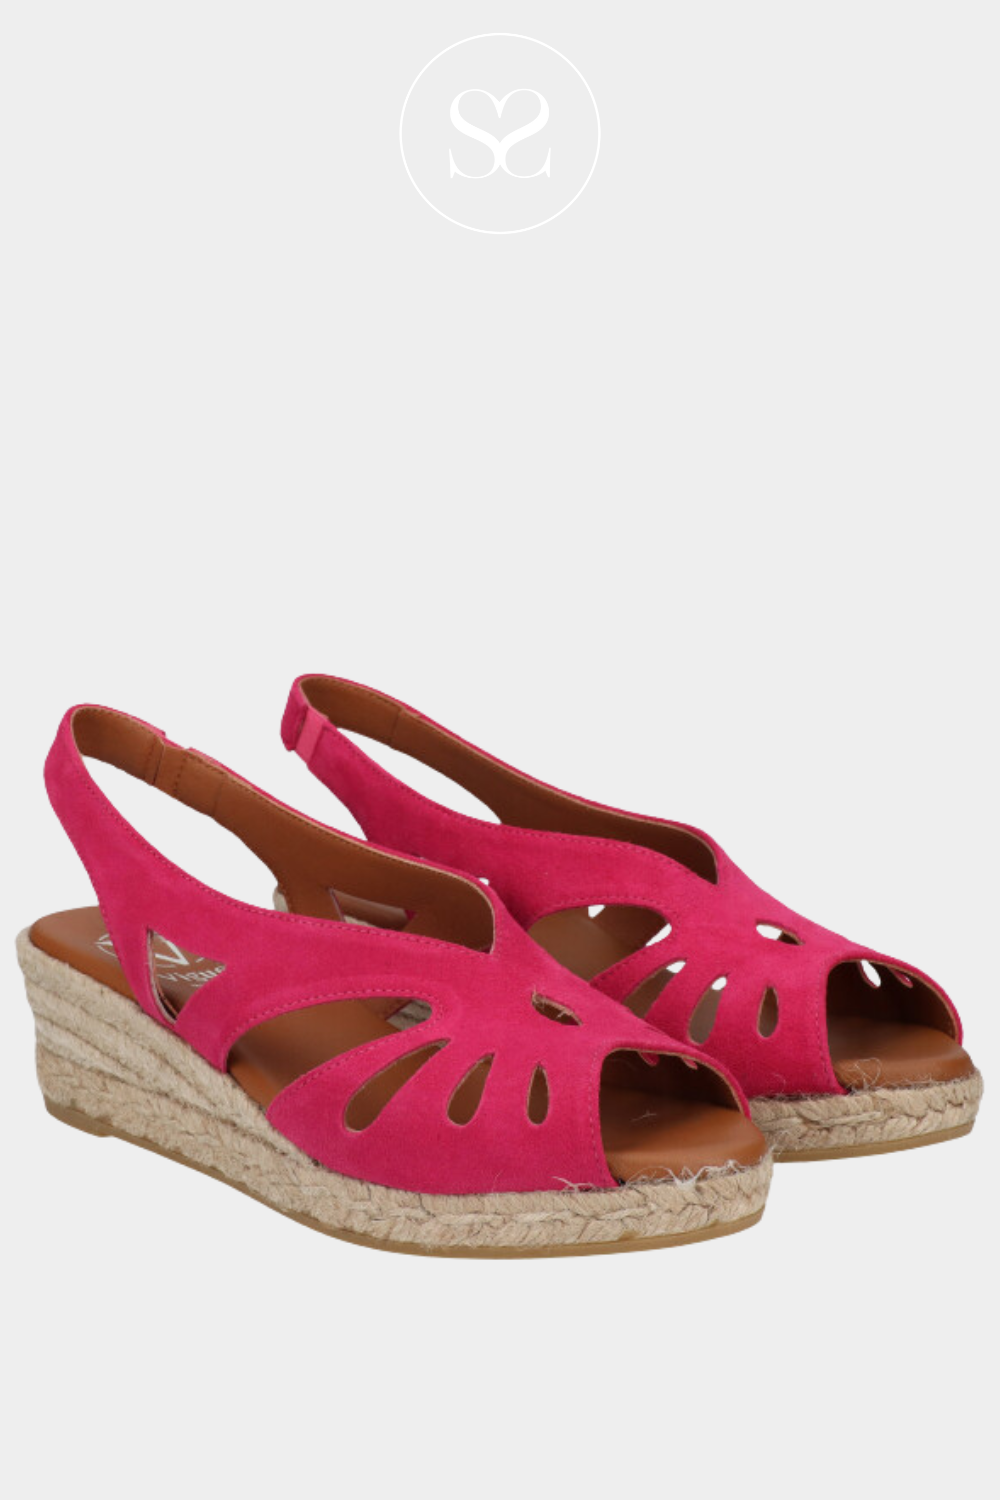 VIGUERA 2123 PINK SUEDE LOW HEEL WEDGE SANDALS WITH ELASTICATED SLINGBACK STRAP AND CUT OUT DETAILING AND A PEEPTOE